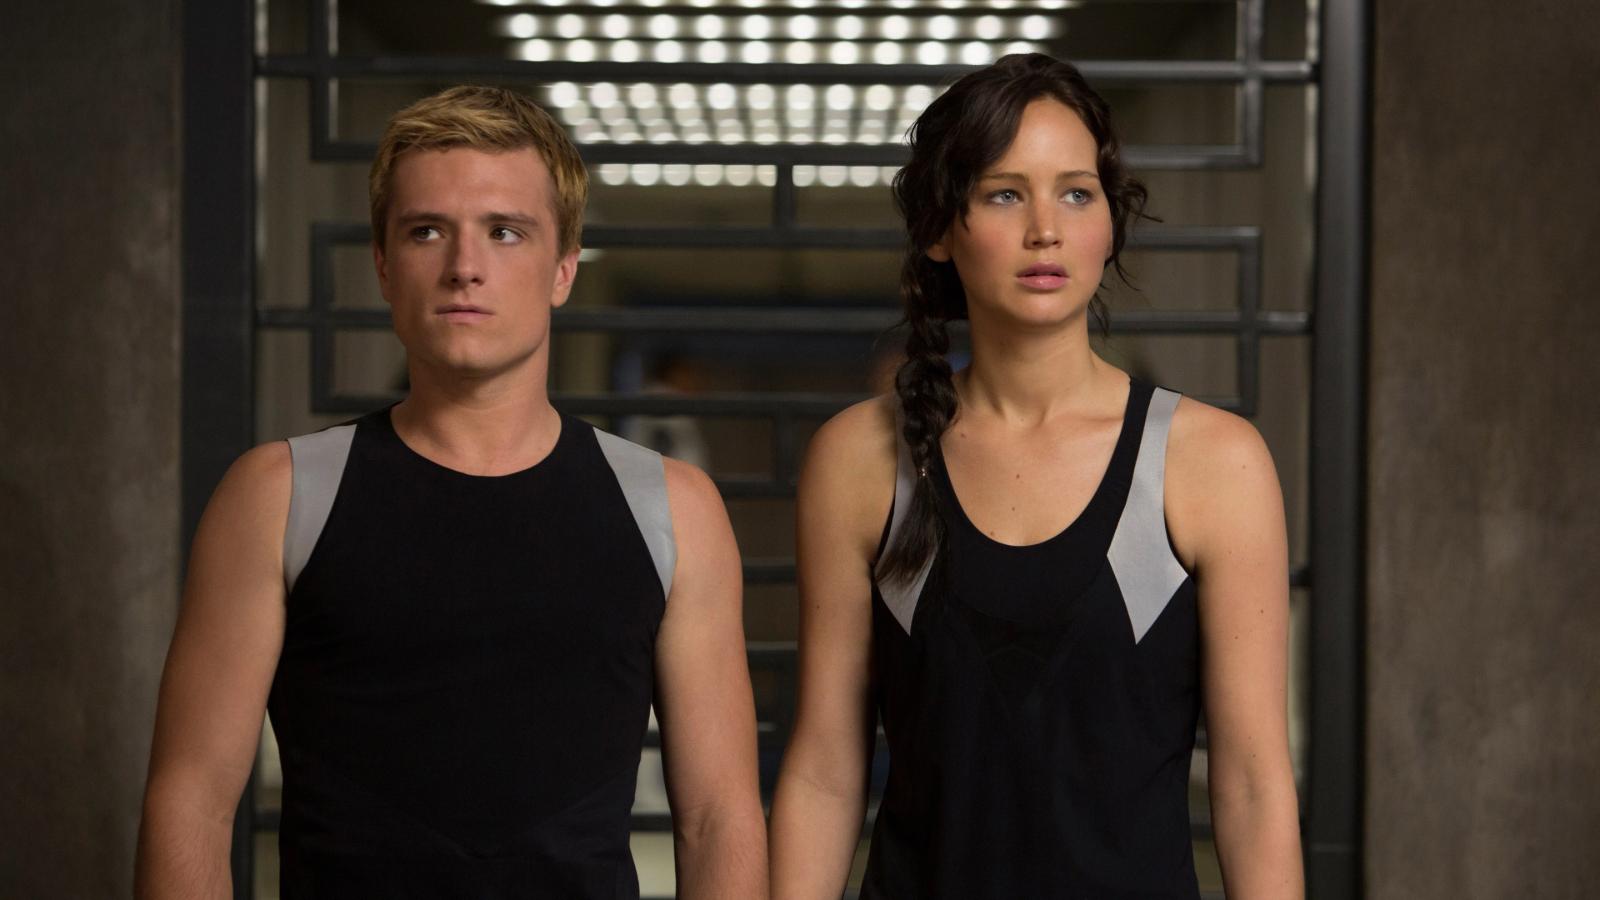 Josh Hutcherson and Jennifer Lawrence as Peeta and Katniss in The Hunger Games: Catching Fire